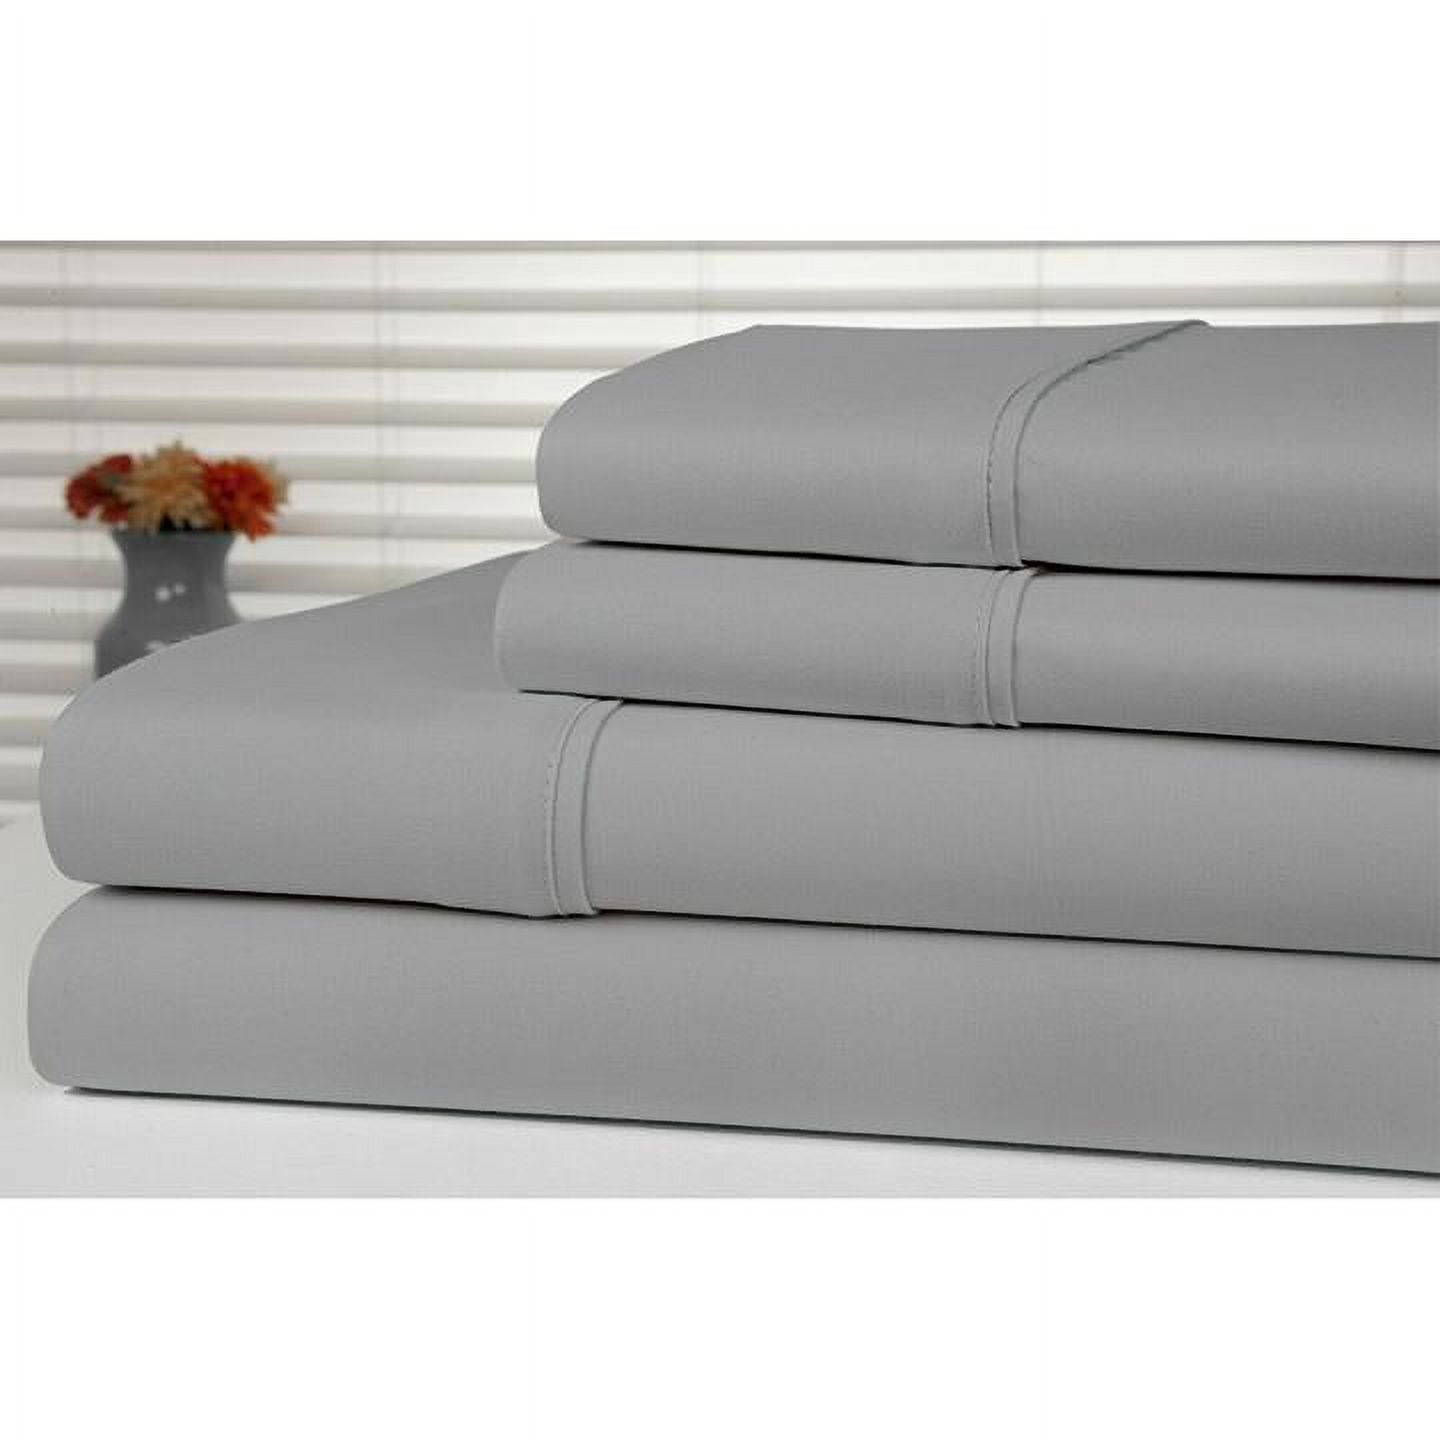 Bamboo Comfort  King Size Bamboo Luxury Solid Sheet Set, White - 4 Piece - image 7 of 21